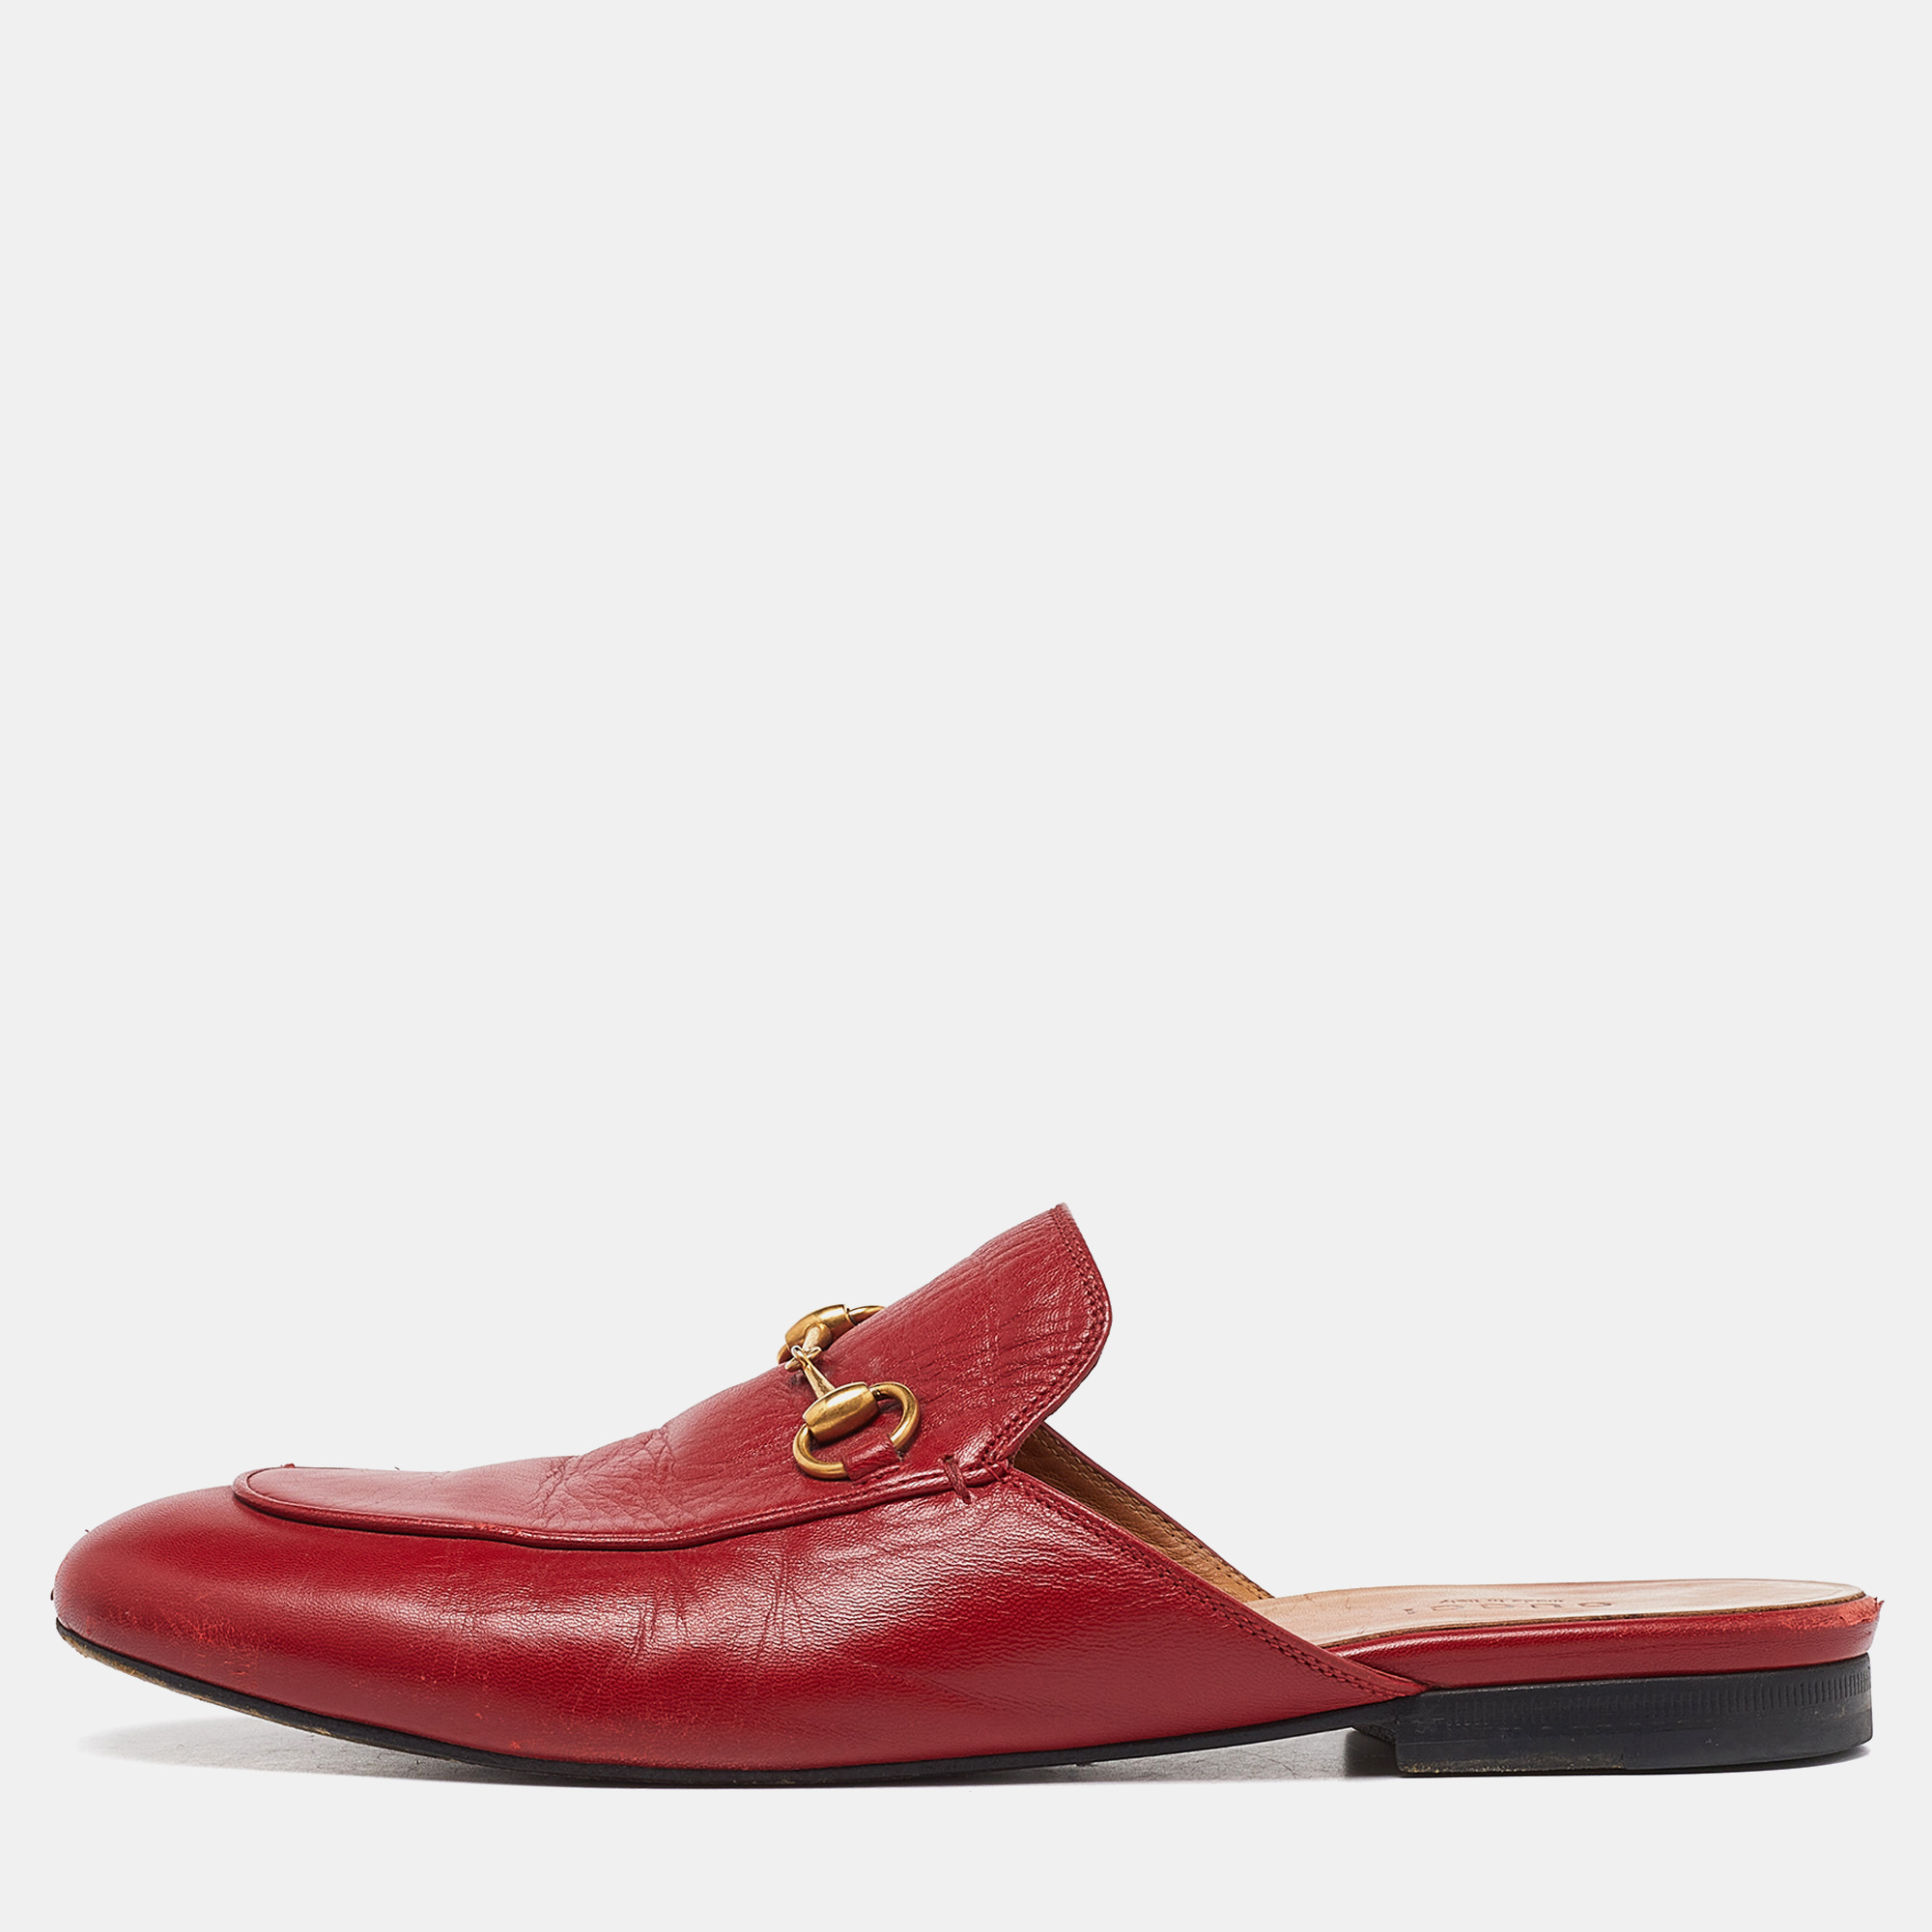 Pre-owned Gucci Red Leather Princetown Horsebit Flat Mules Size 39